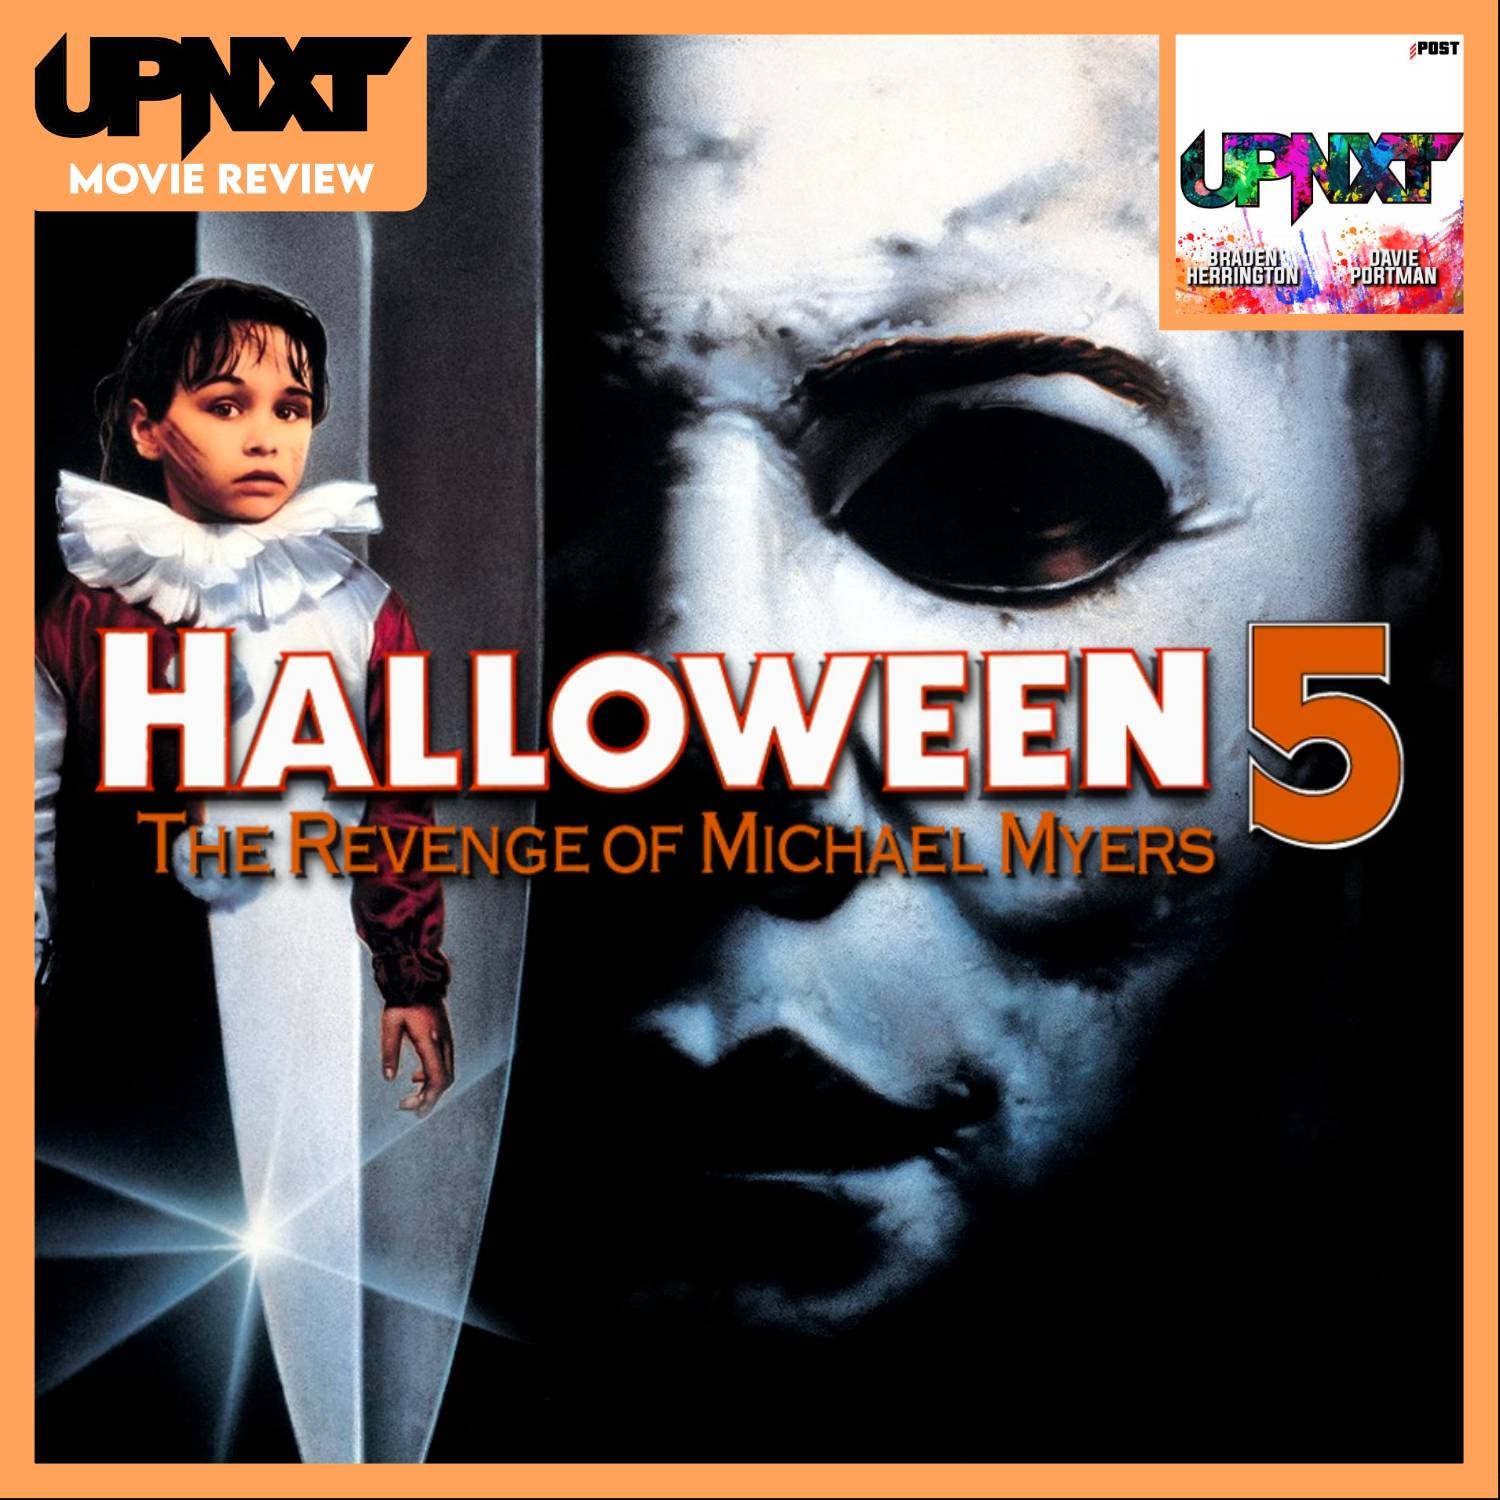 upNXT MOVIE REVIEW: Halloween 5 - The Revenge of Michael Myers (1989)